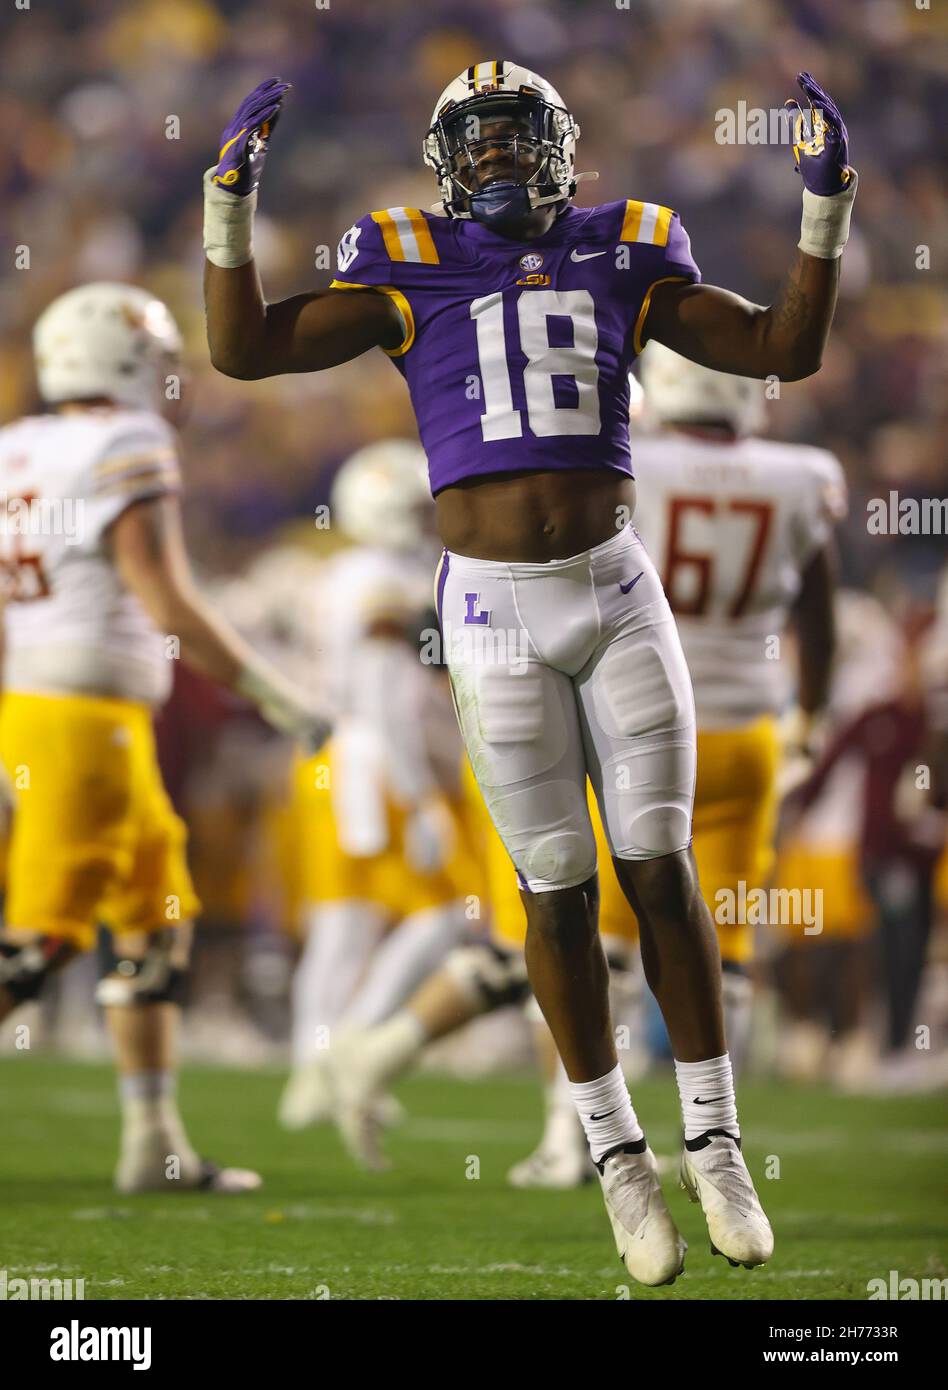 Baton Rouge, LA, USA. 20th Nov, 2021. LSU's Damone Clark #18 encourages the Tiger fans to get loud 'during the NCAA football game between the LSU Tigers and the ULM Warhawks at Tiger Stadium in Baton Rouge, LA. Kyle Okita/CSM/Alamy Live News Stock Photo